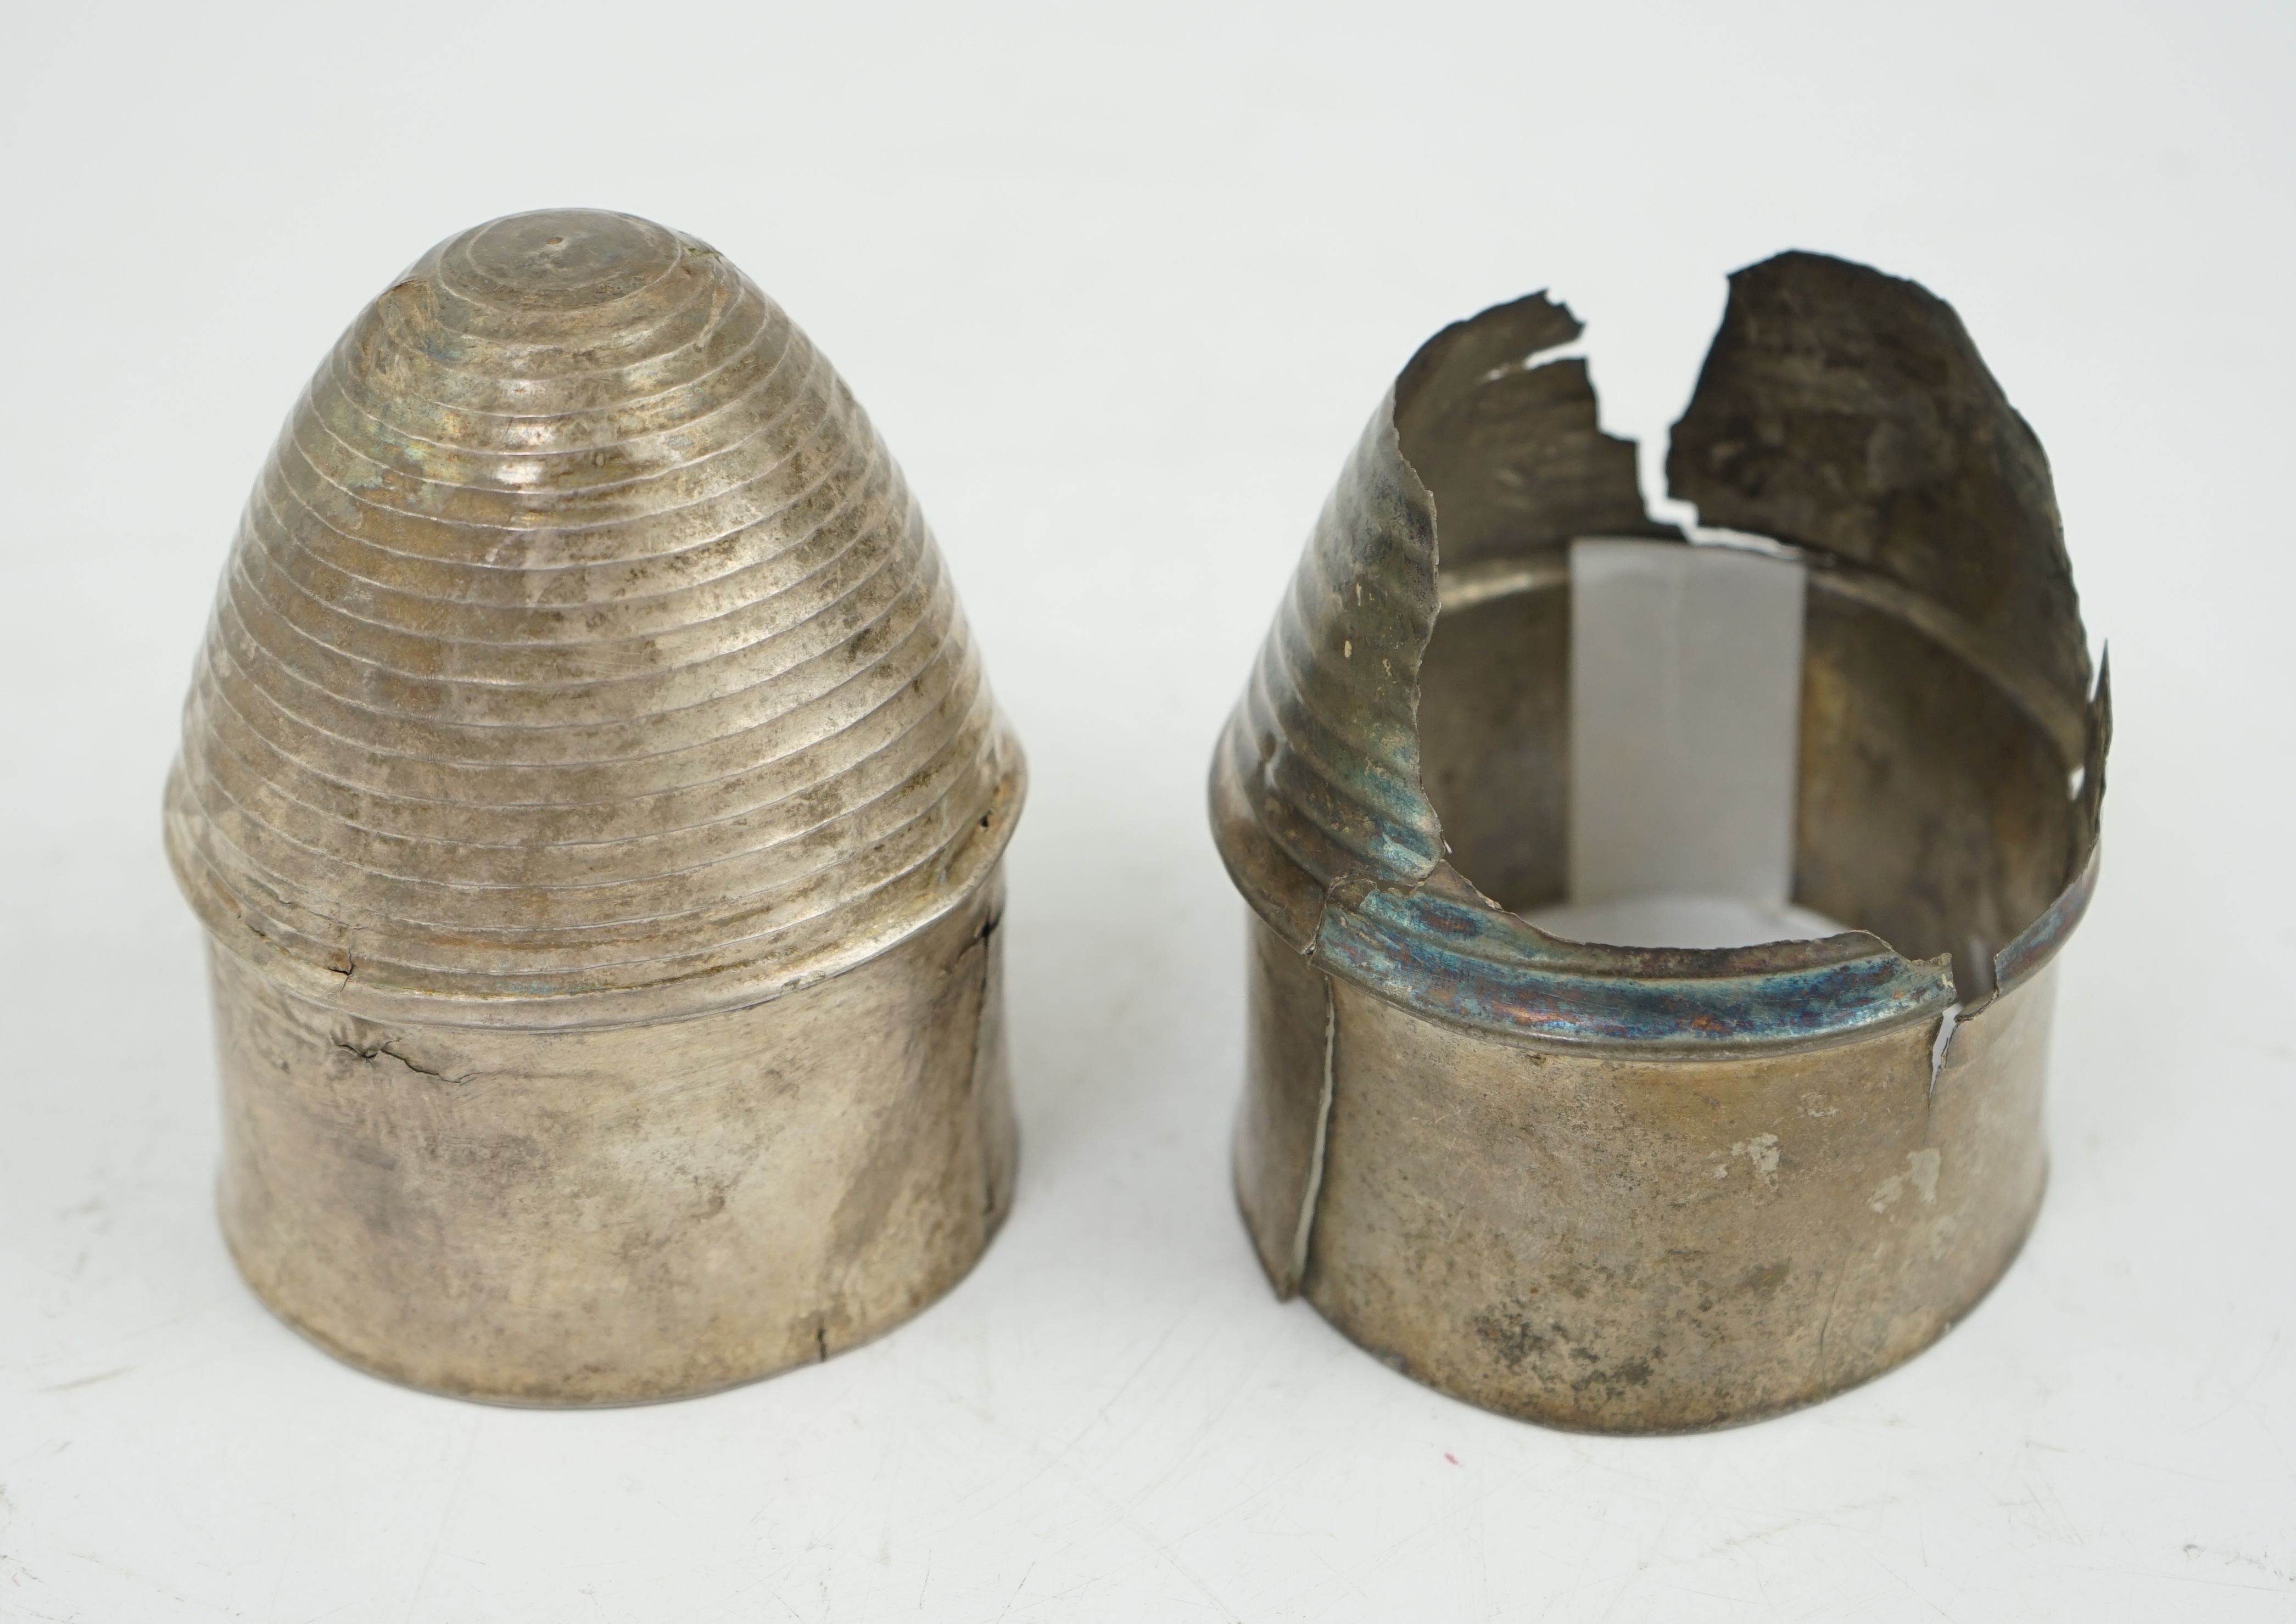 Two silver carinated cups, one fragmentary, Roman or Gandhara, c. late 1st century BC - early 1st century A.D.